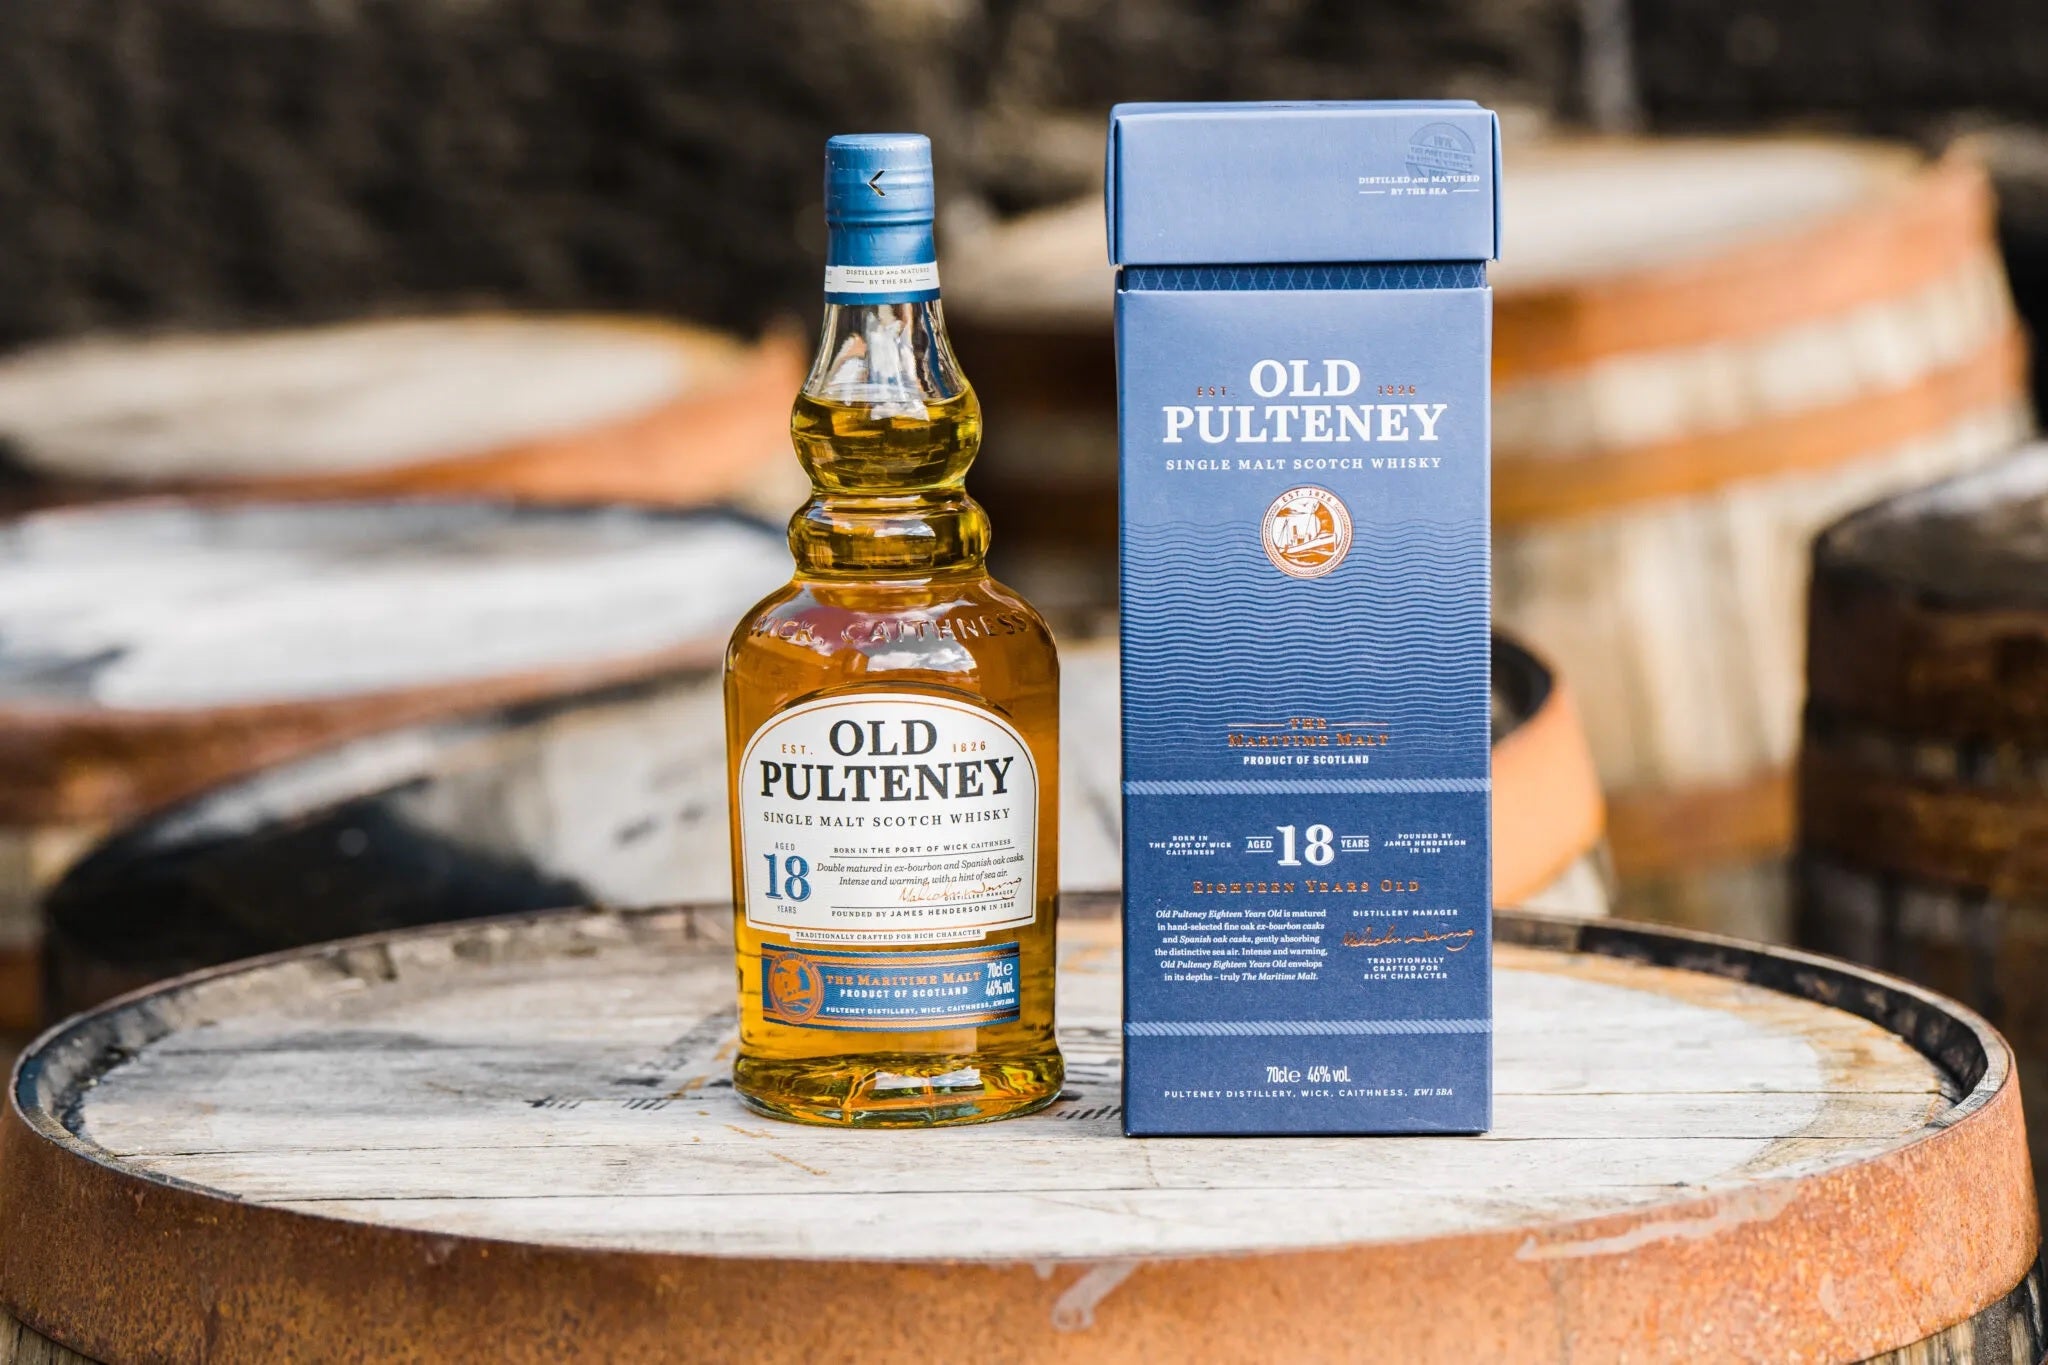 Spicy whisky? Old Pulteney 18 Year Old